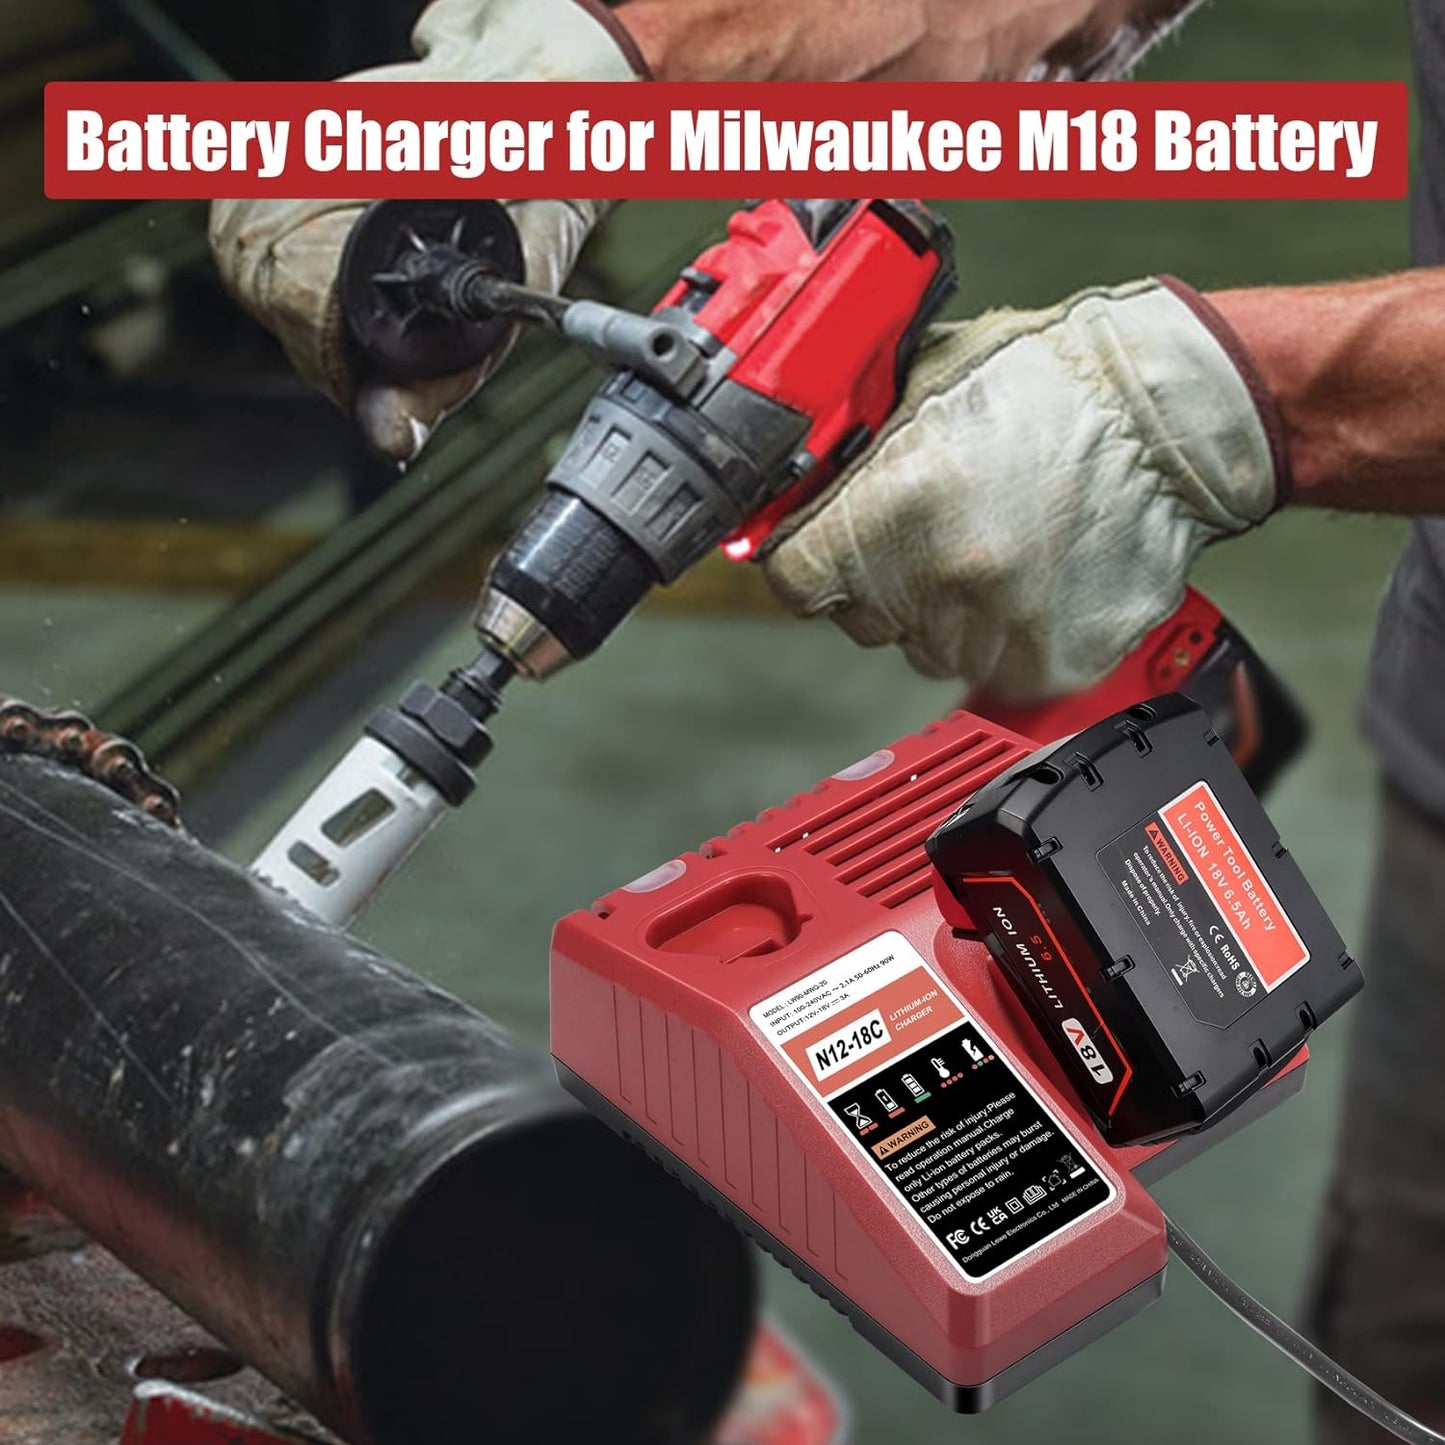 JYJZPB Multi Voltage Battery Charger for Milwaukee 48-59-1812 M12 & M18 Battery 48-11-1850 48-11-1840 48-11-1815 48-11-1828